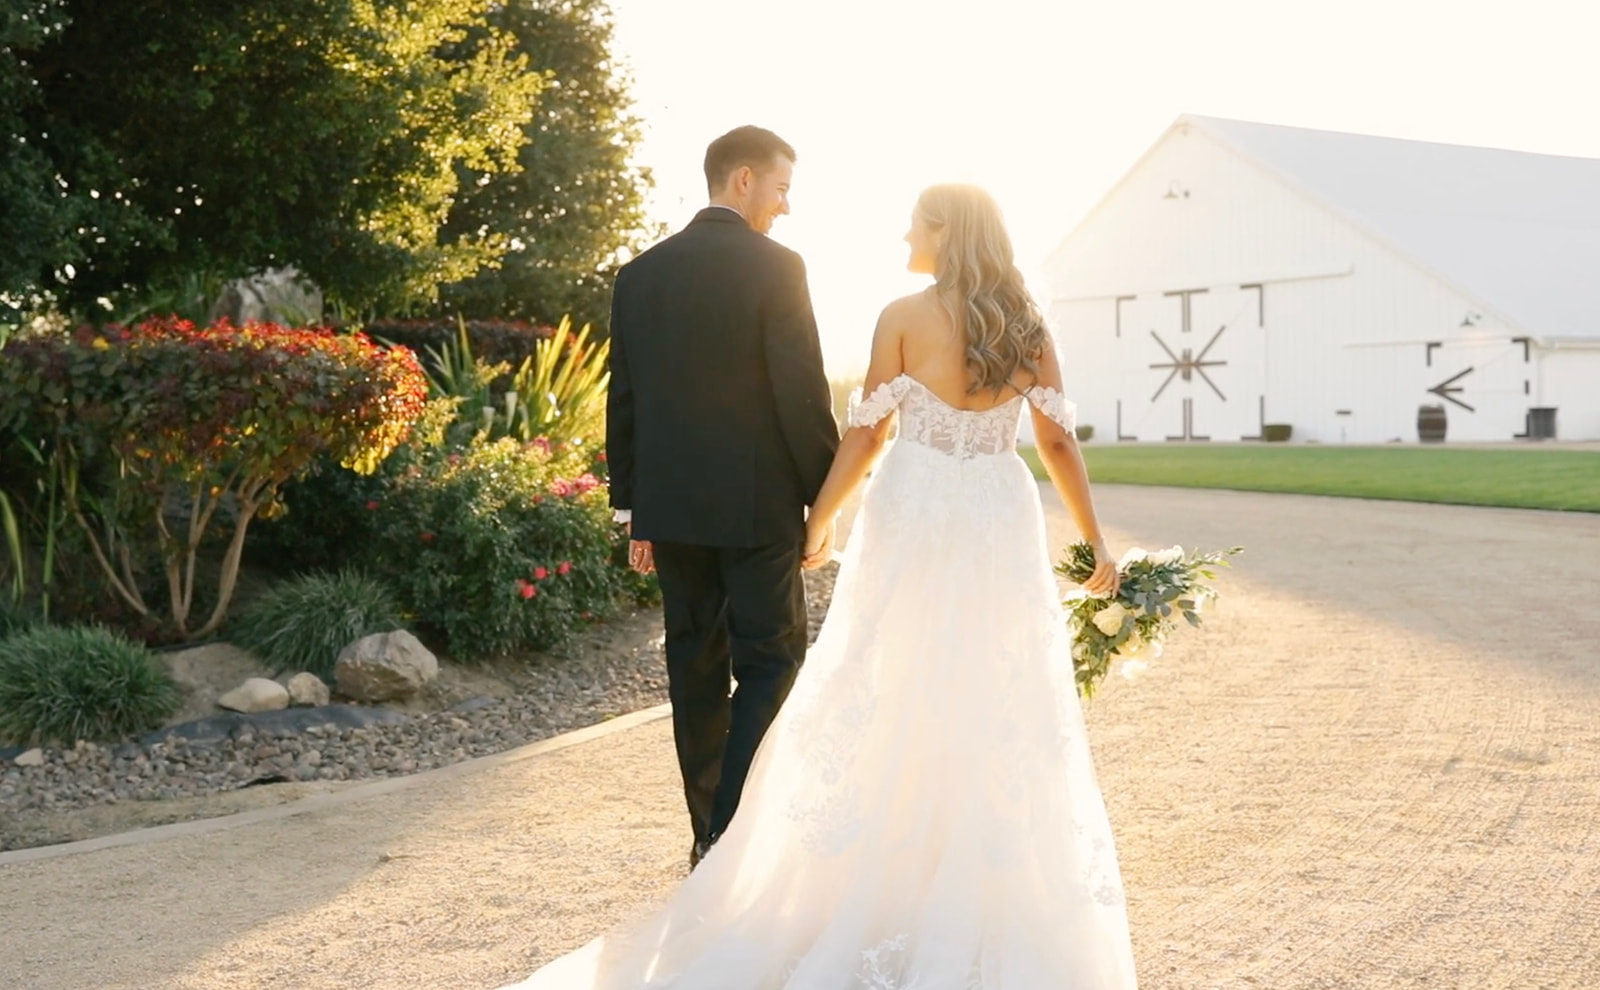 Bride and groom, hand in hand, walk into the golden sunset at the White Barn in San Luis Obispo